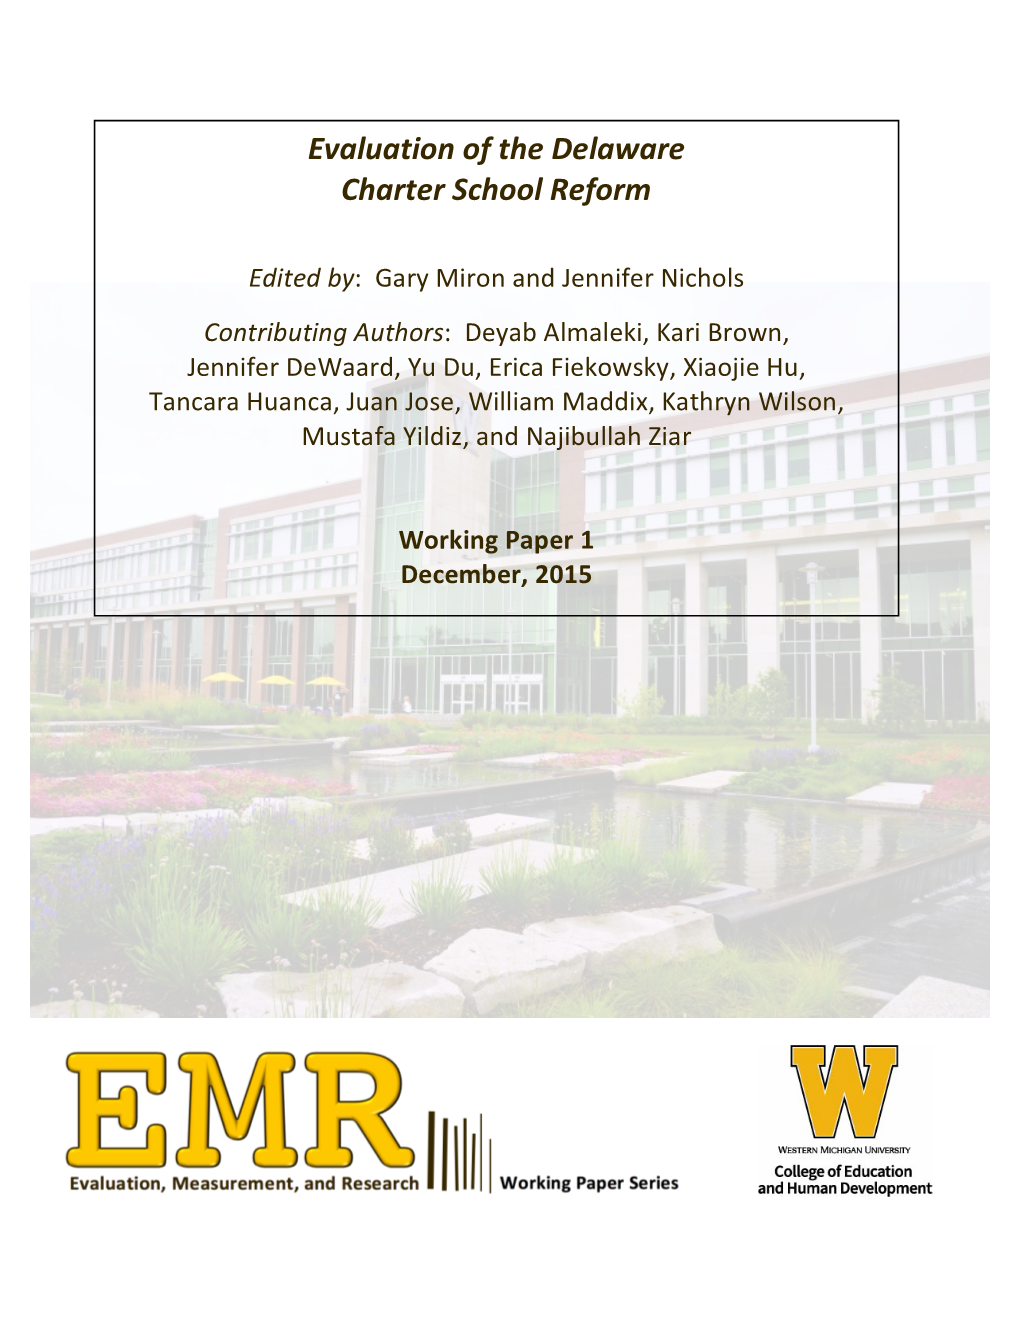 Evaluation of the Delaware Charter School Reform